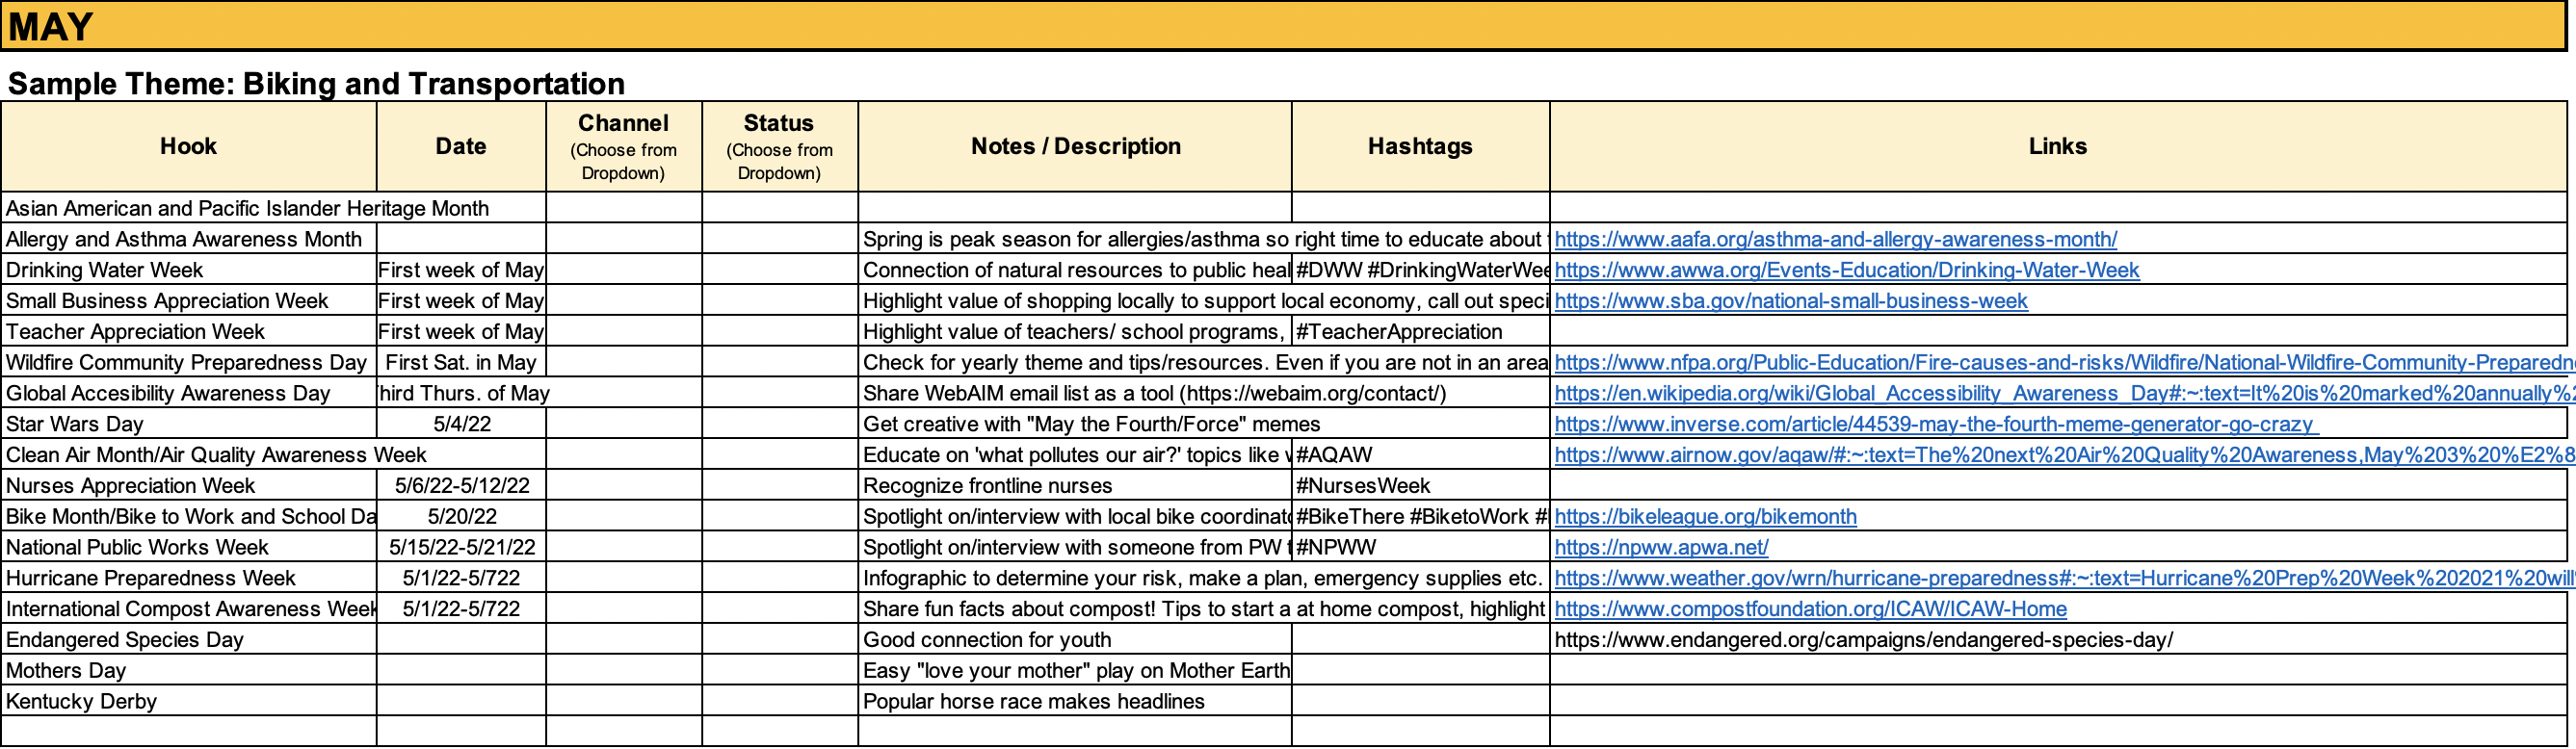 May excel spreadsheet with columns for topic, date, ideas, hashtag and links